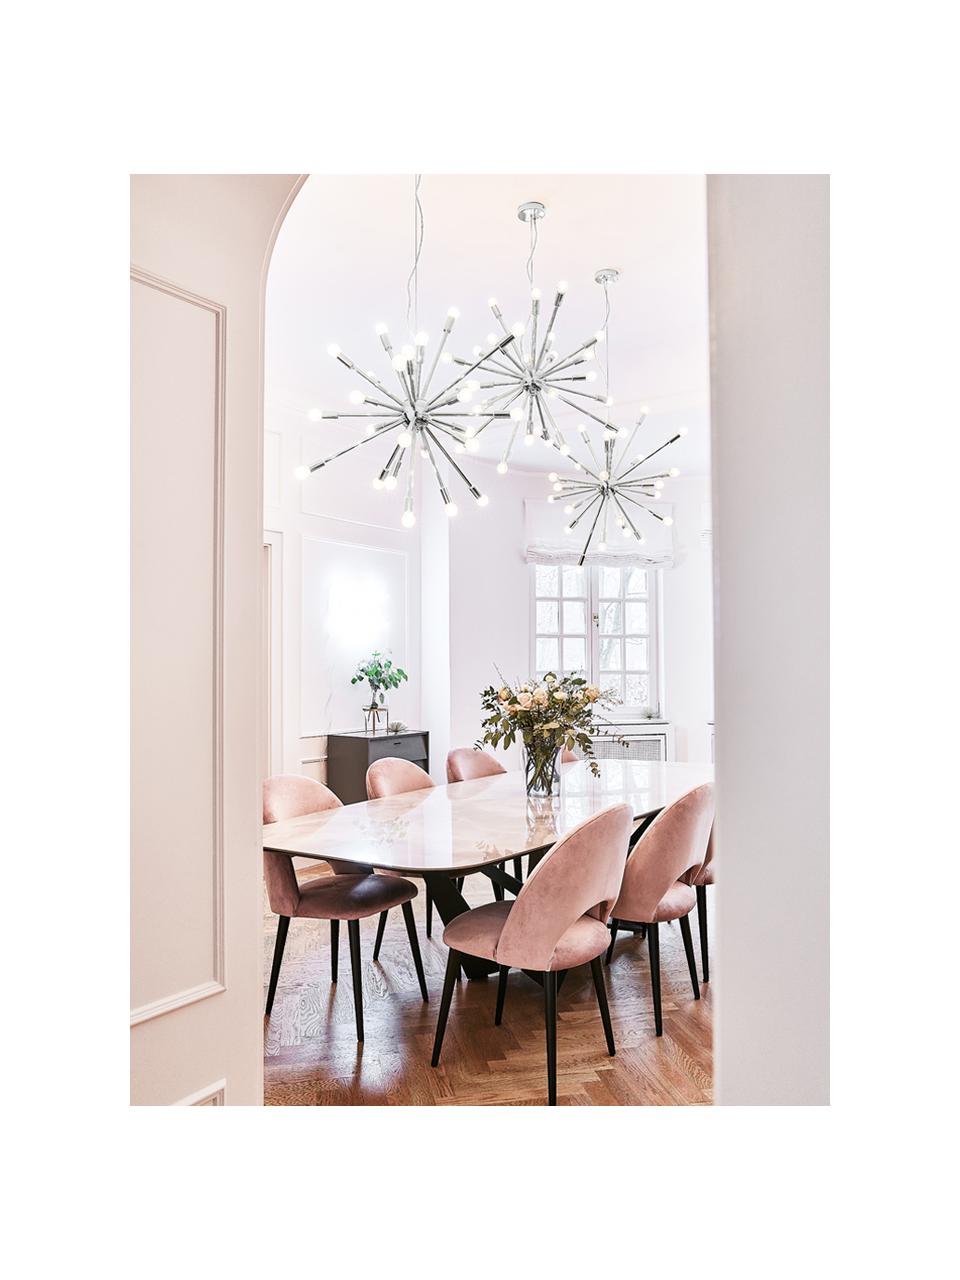 Grote hanglamp | Westwing